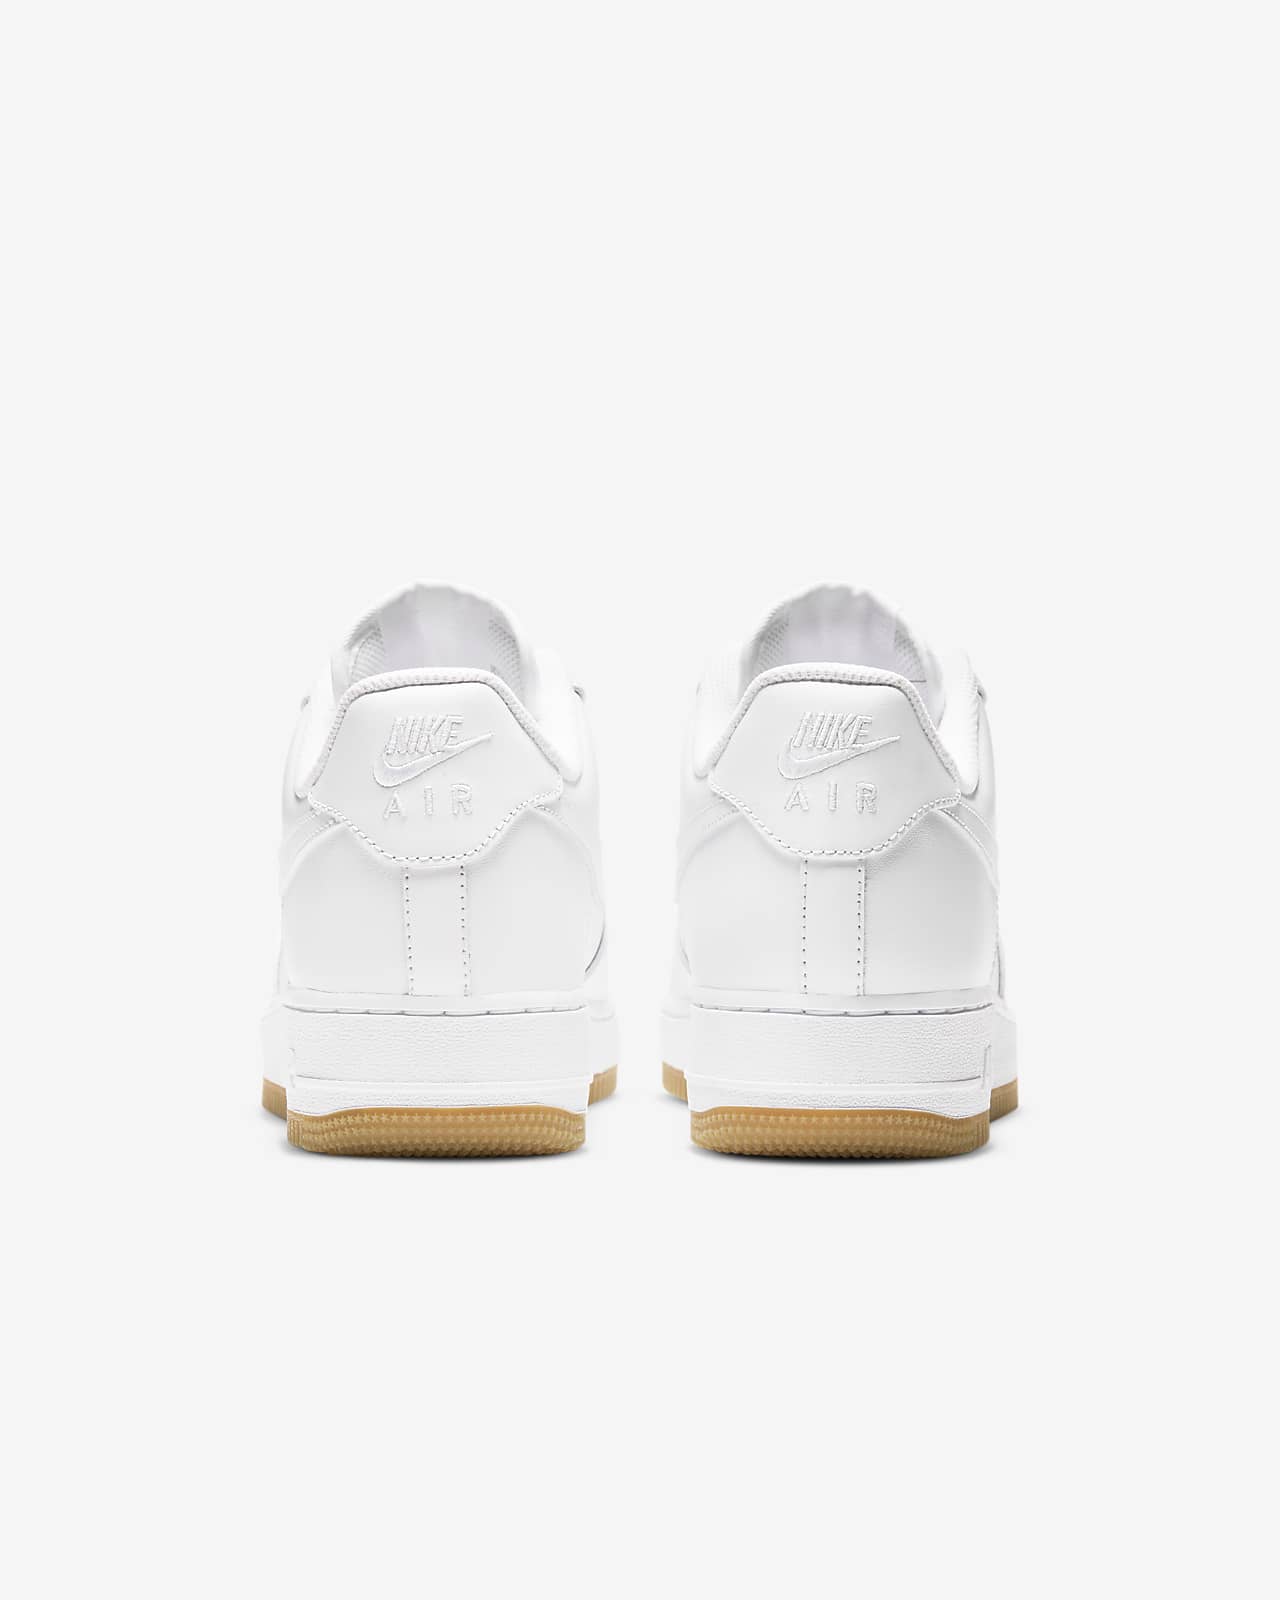 nike air force 1 low white gum sole